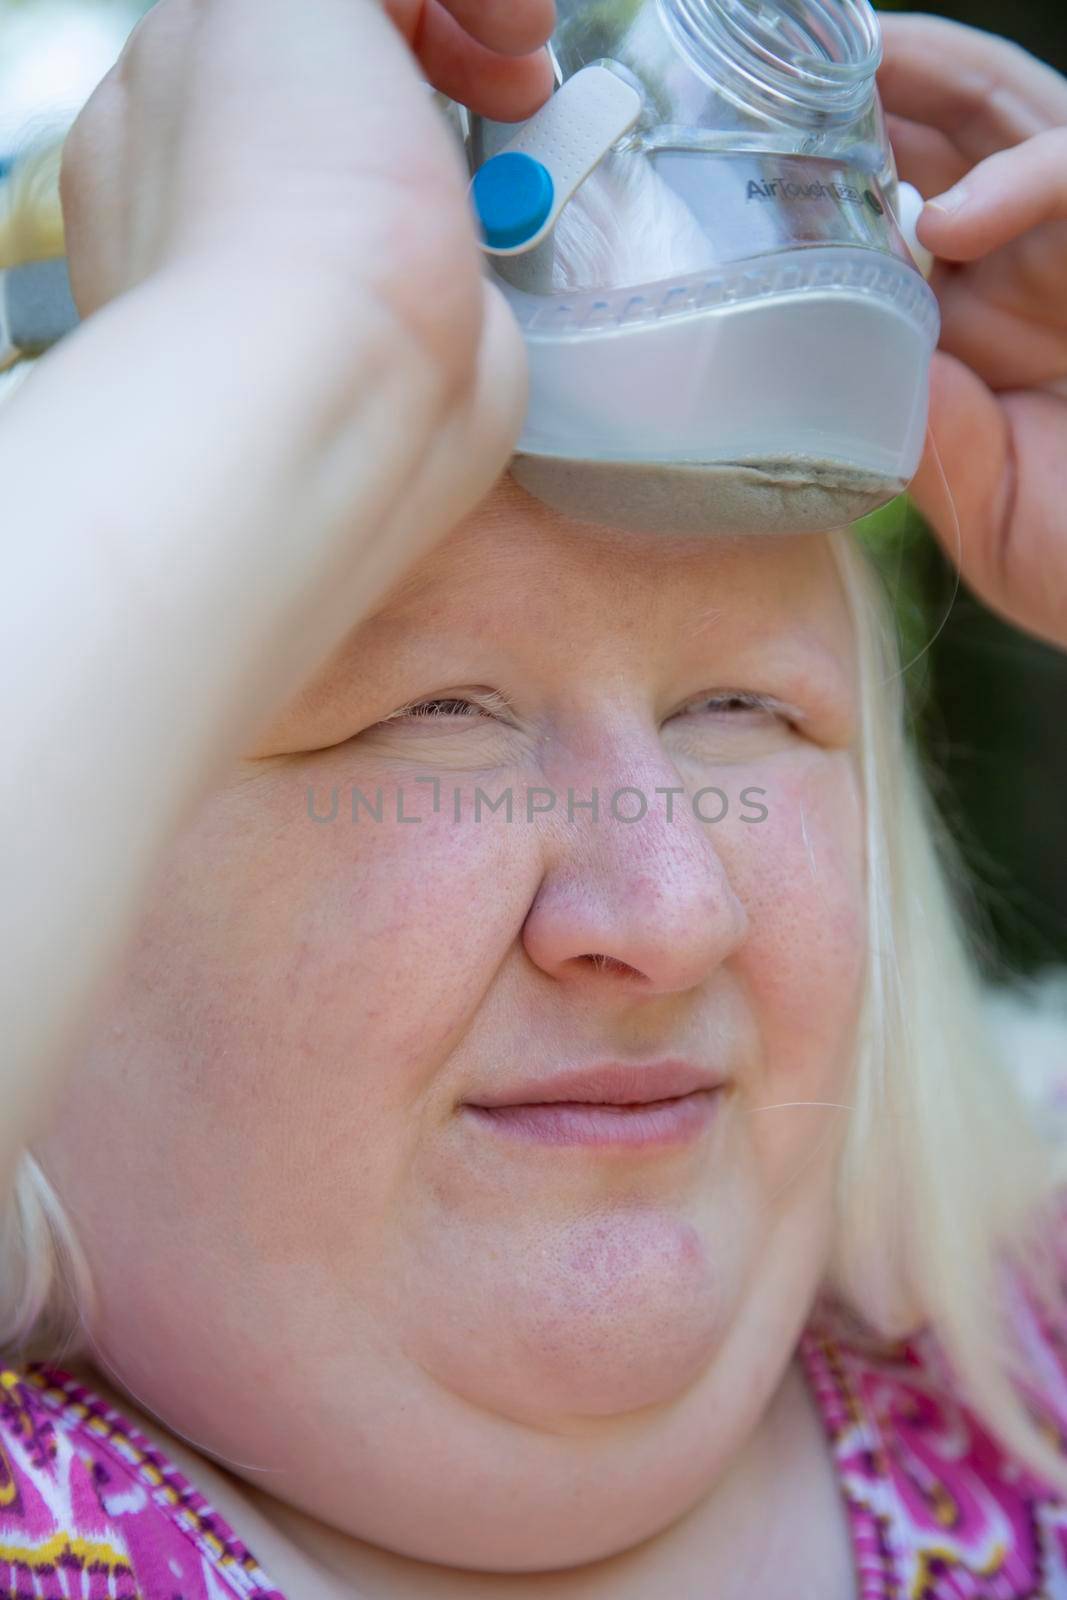 Albino woman putting on a CPAP mask outside